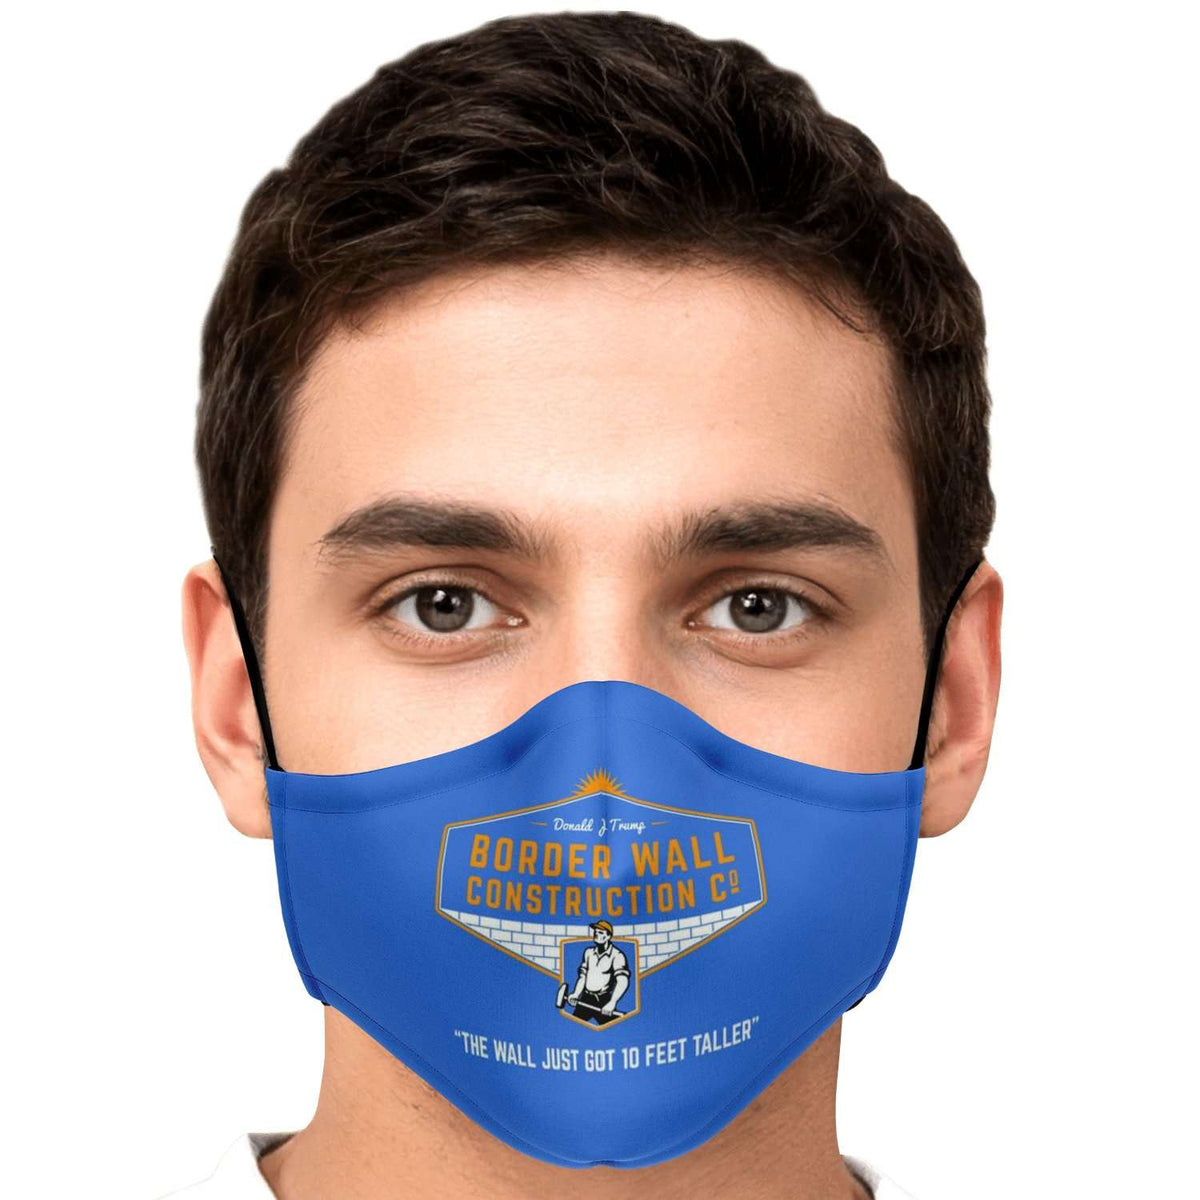 Designs by MyUtopia Shout Out:Border Wall Construction Company Fitted Face Mask w Adjustable Ear Loops,Adult / Single / No filters,Fabric Face Mask